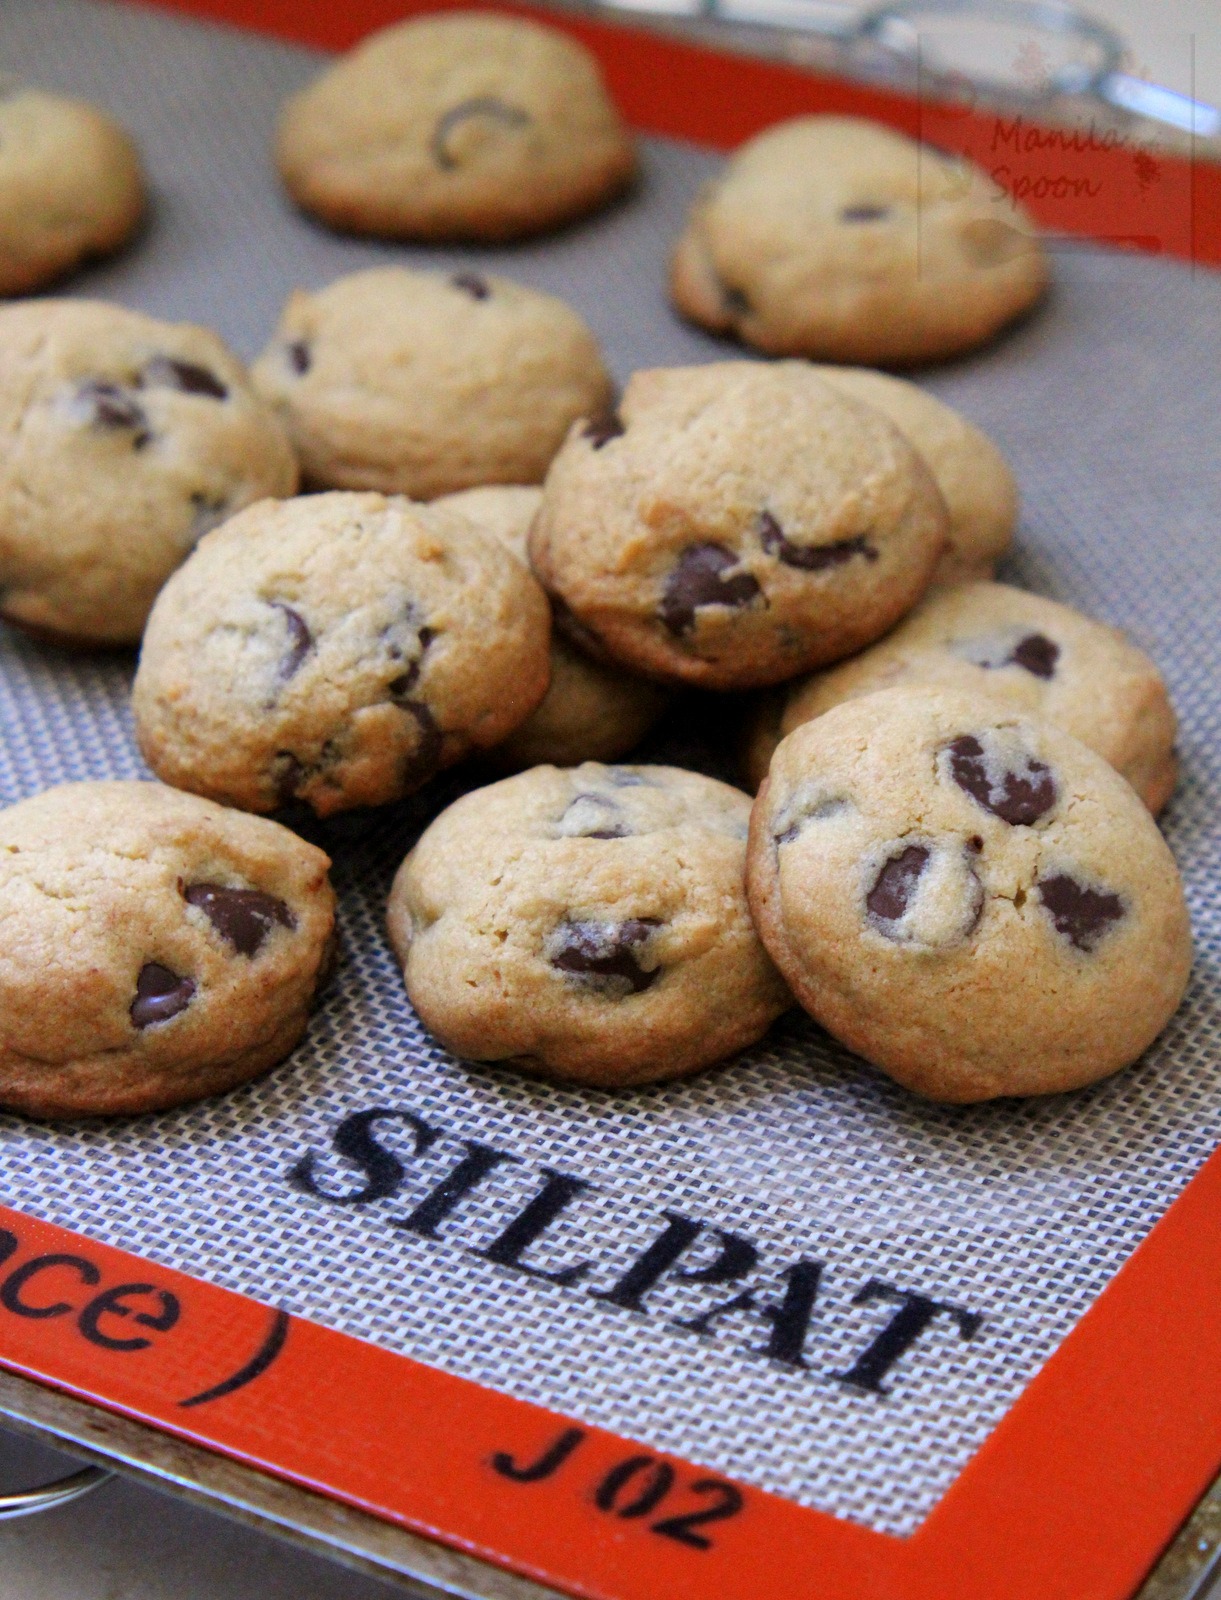 Product Review: Silpat and Yummy Chocolate Chip Cookies